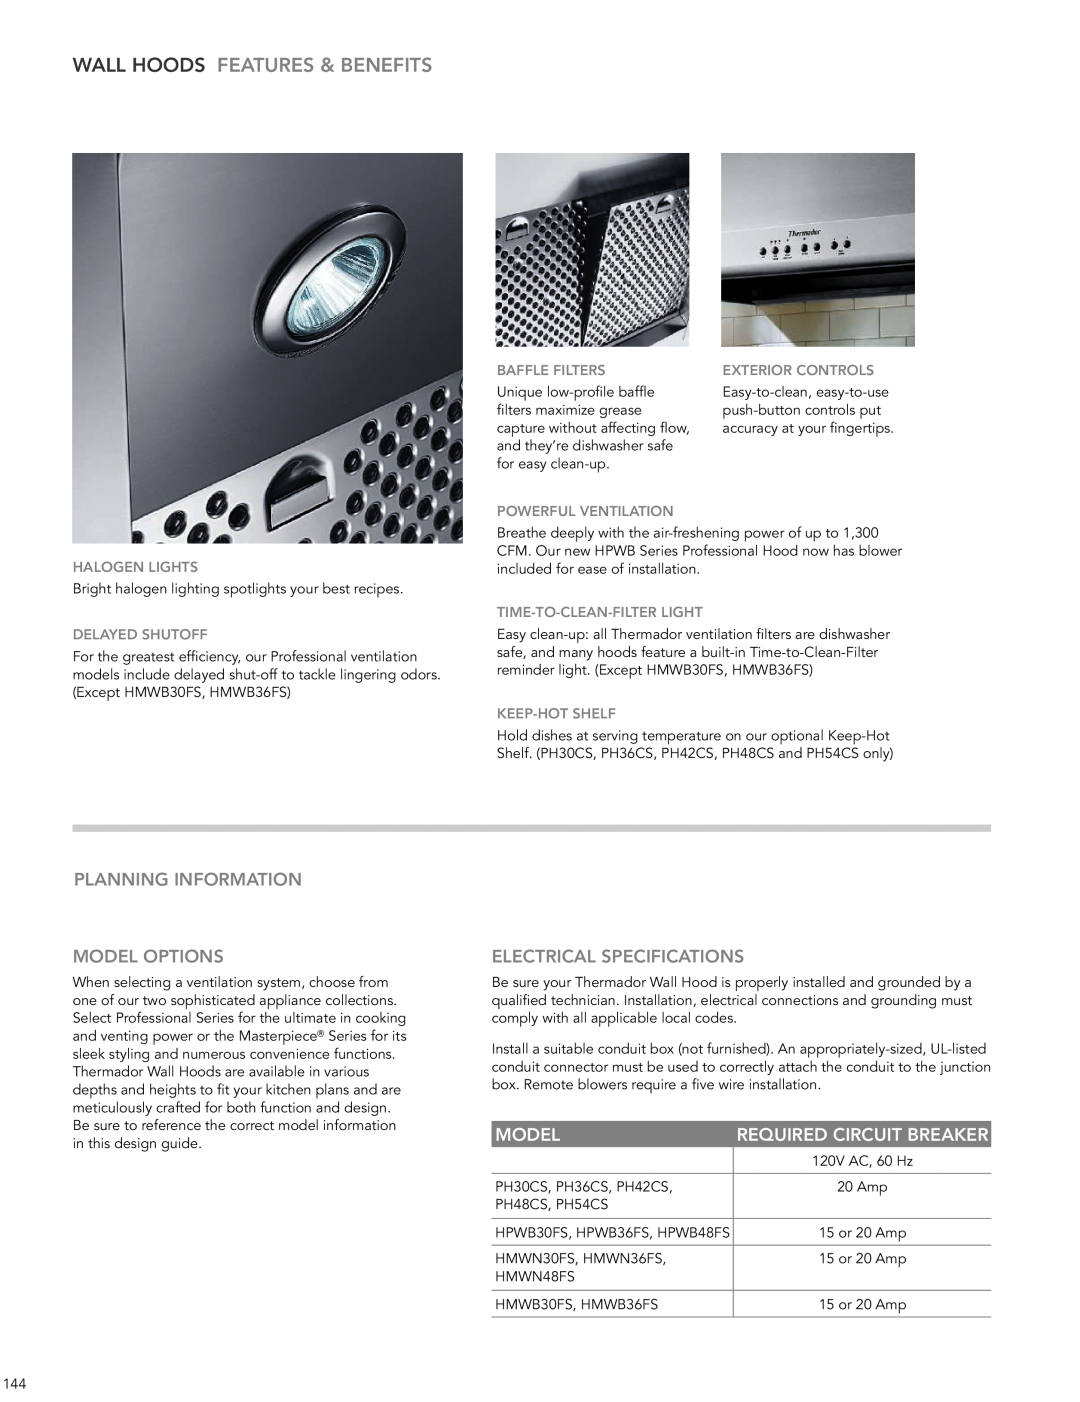 Thermador HMWB36FS manual Wall Hoods Features & Benefits, PLANNINg INFORmATION mODEL OPTIONS, Electrical Specifications 